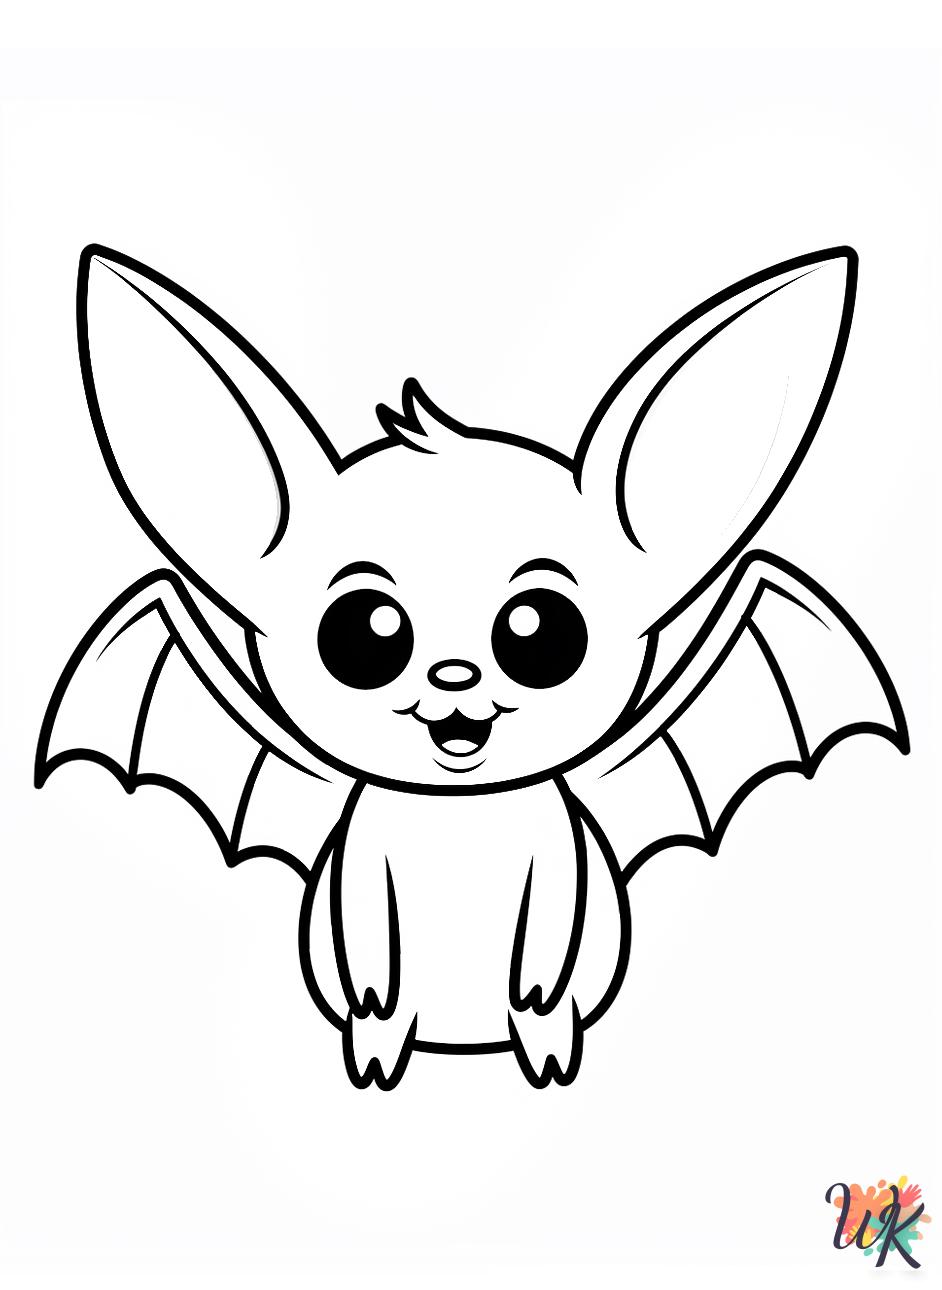 Bat free coloring pages